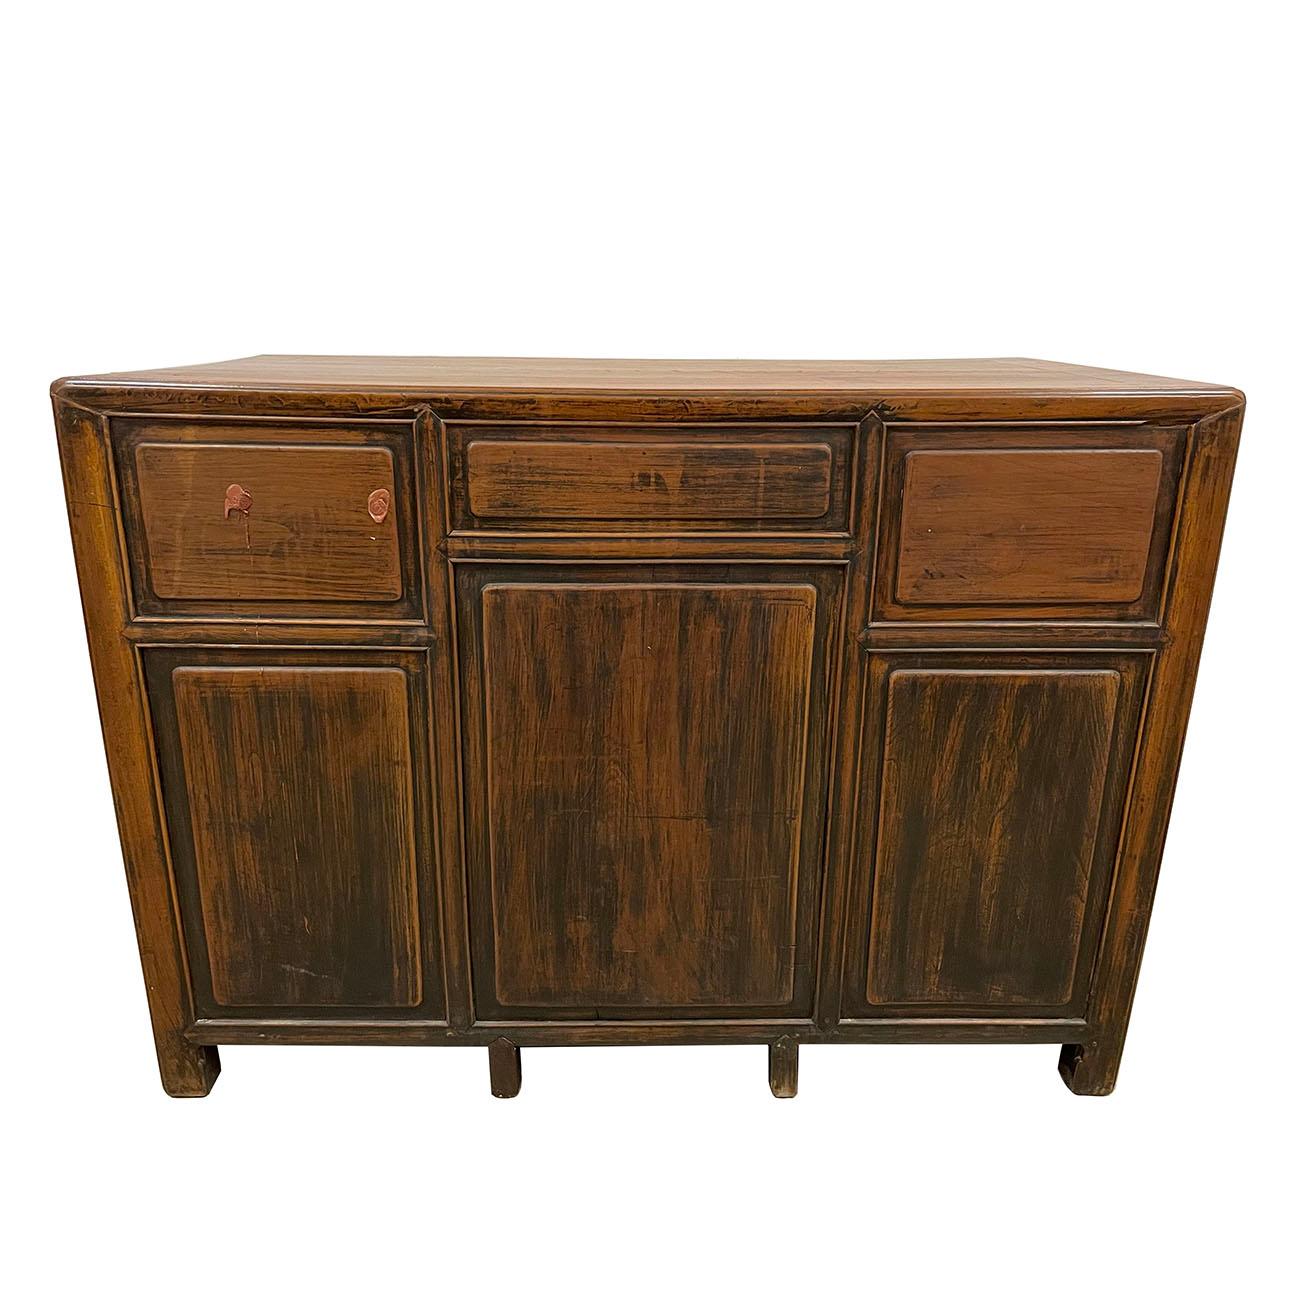 Antique, Chinese Beech Wood Writing Desk, Vanity For Sale 5